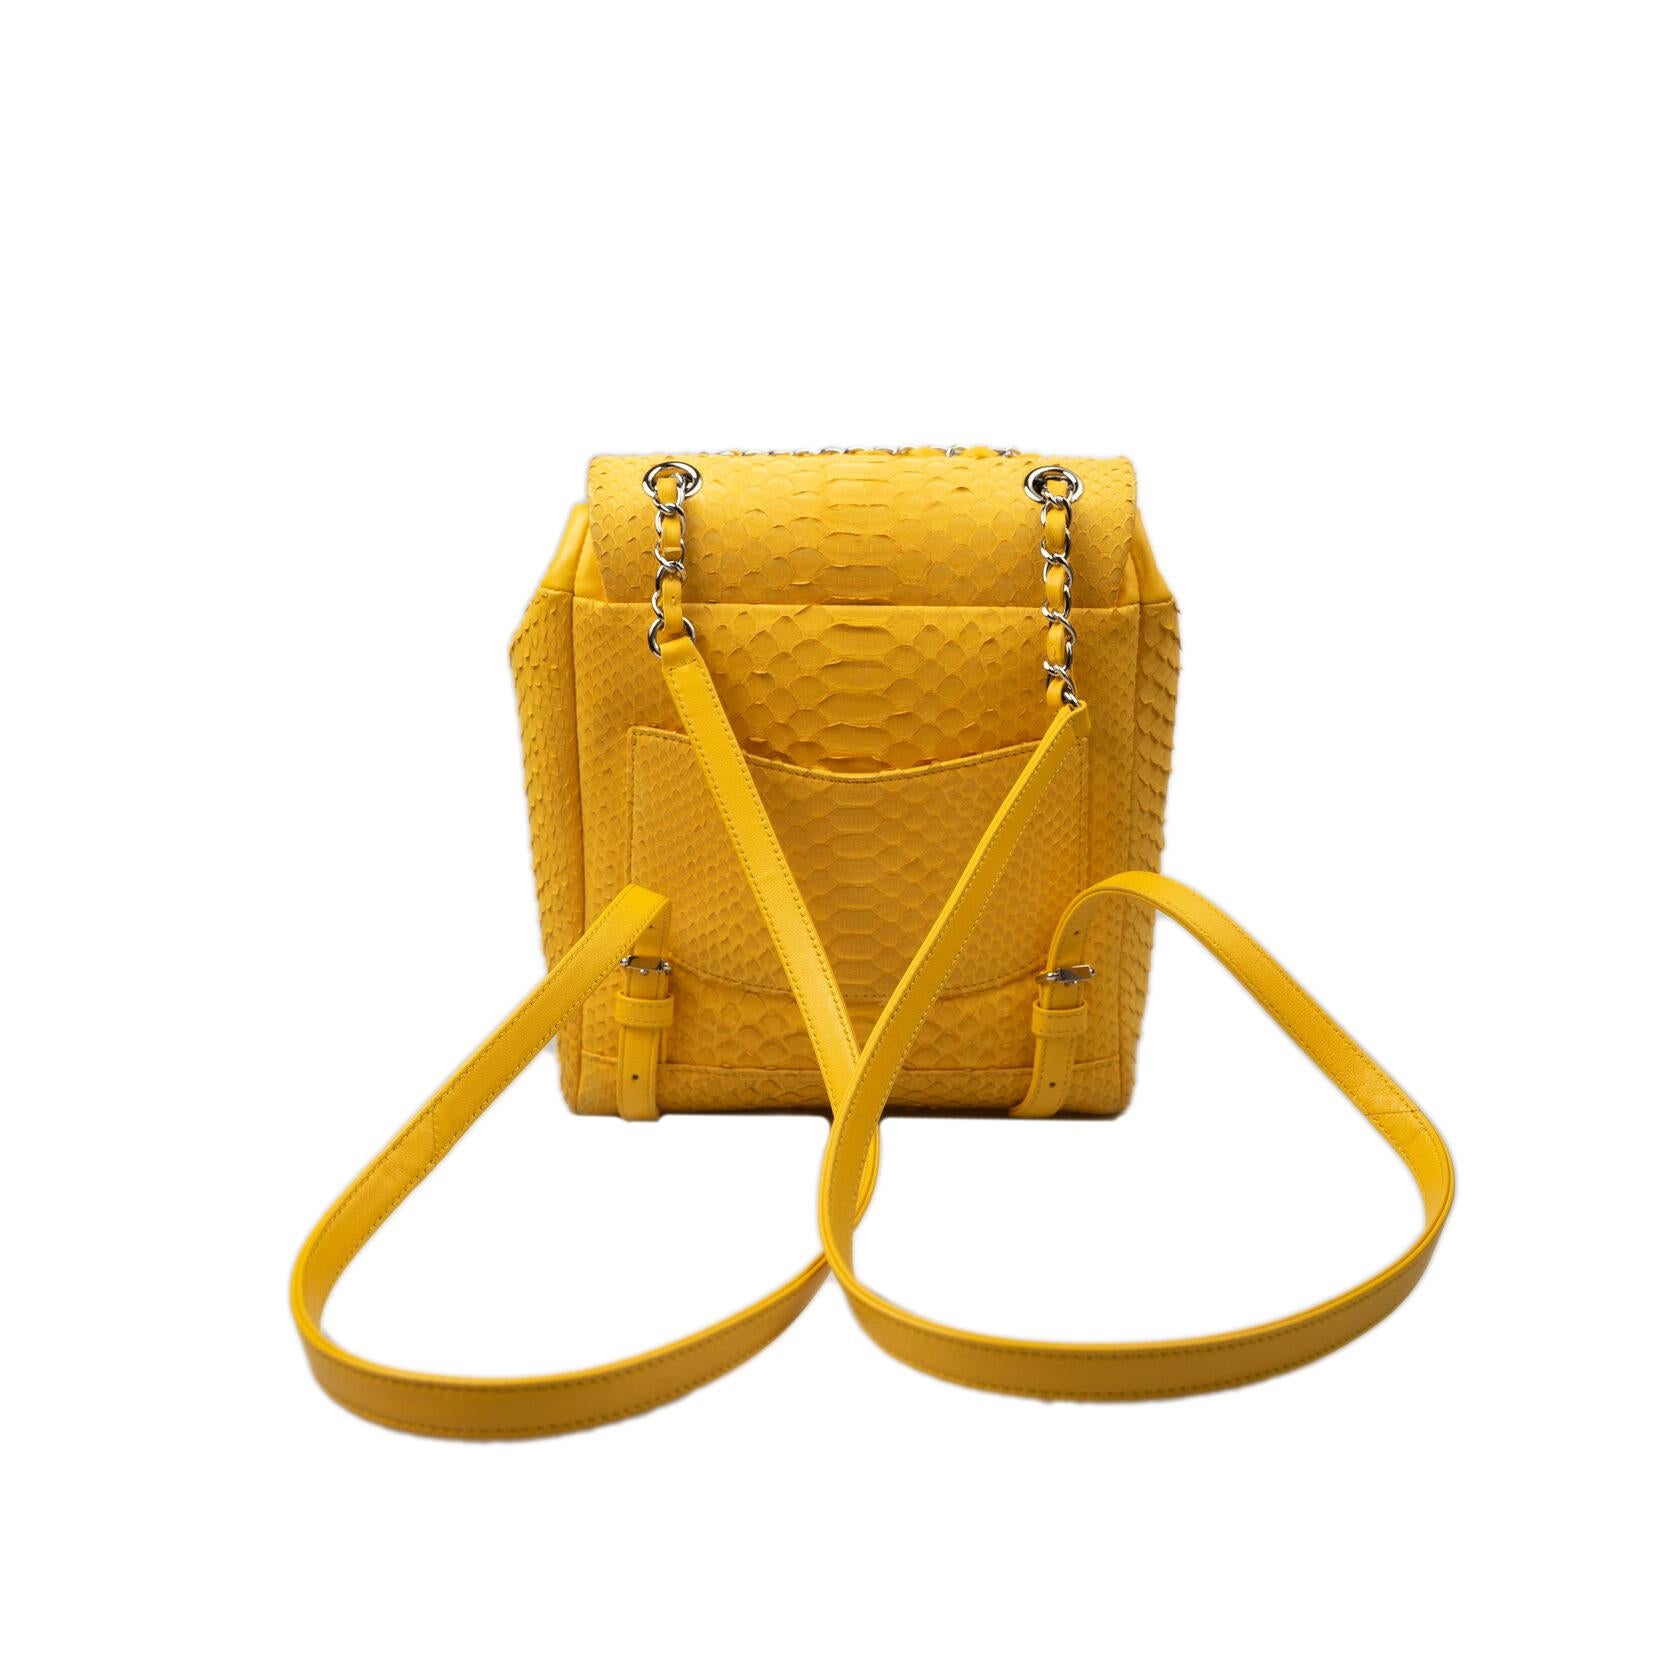 CONDITION: A: Excellent condition with few signs of use; carefully kept.
SIZE: 24/35/13 cm; Adjustable Handles min 82 cm - max 96 cm.
BRAND: CHANEL
MODEL: Urban Spirit Backpack Medium
Yellow color
MATERIAL: Python
INSIDE COLOR: Yellow
INSIDE